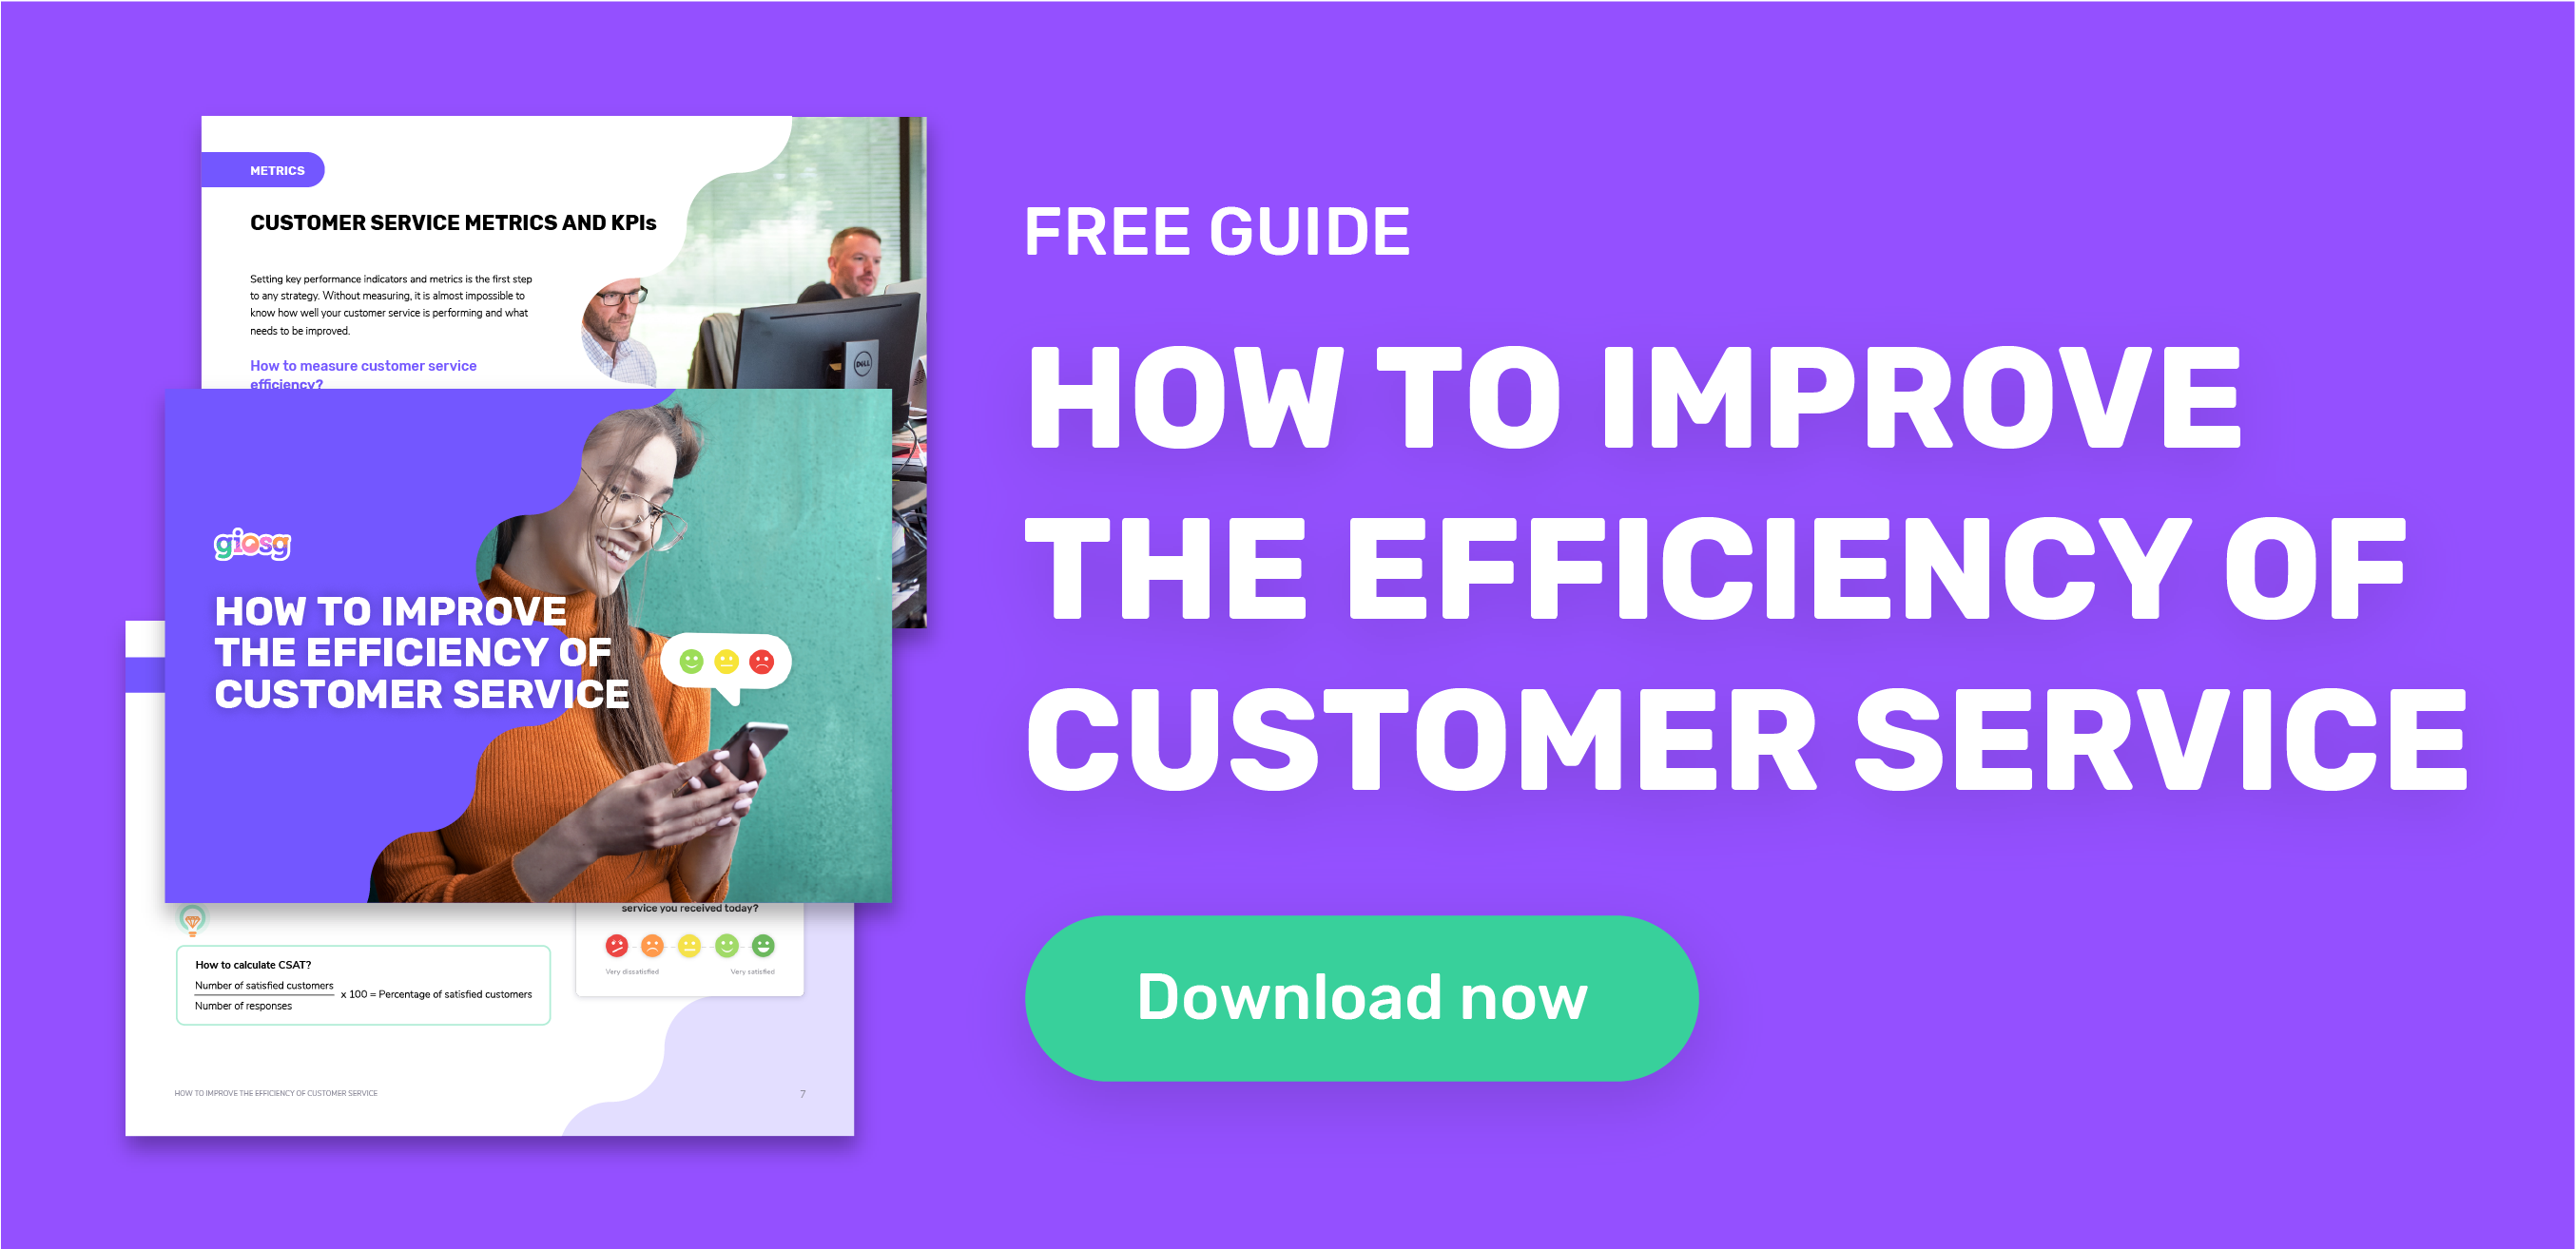 Download customer service efficiency guide now 